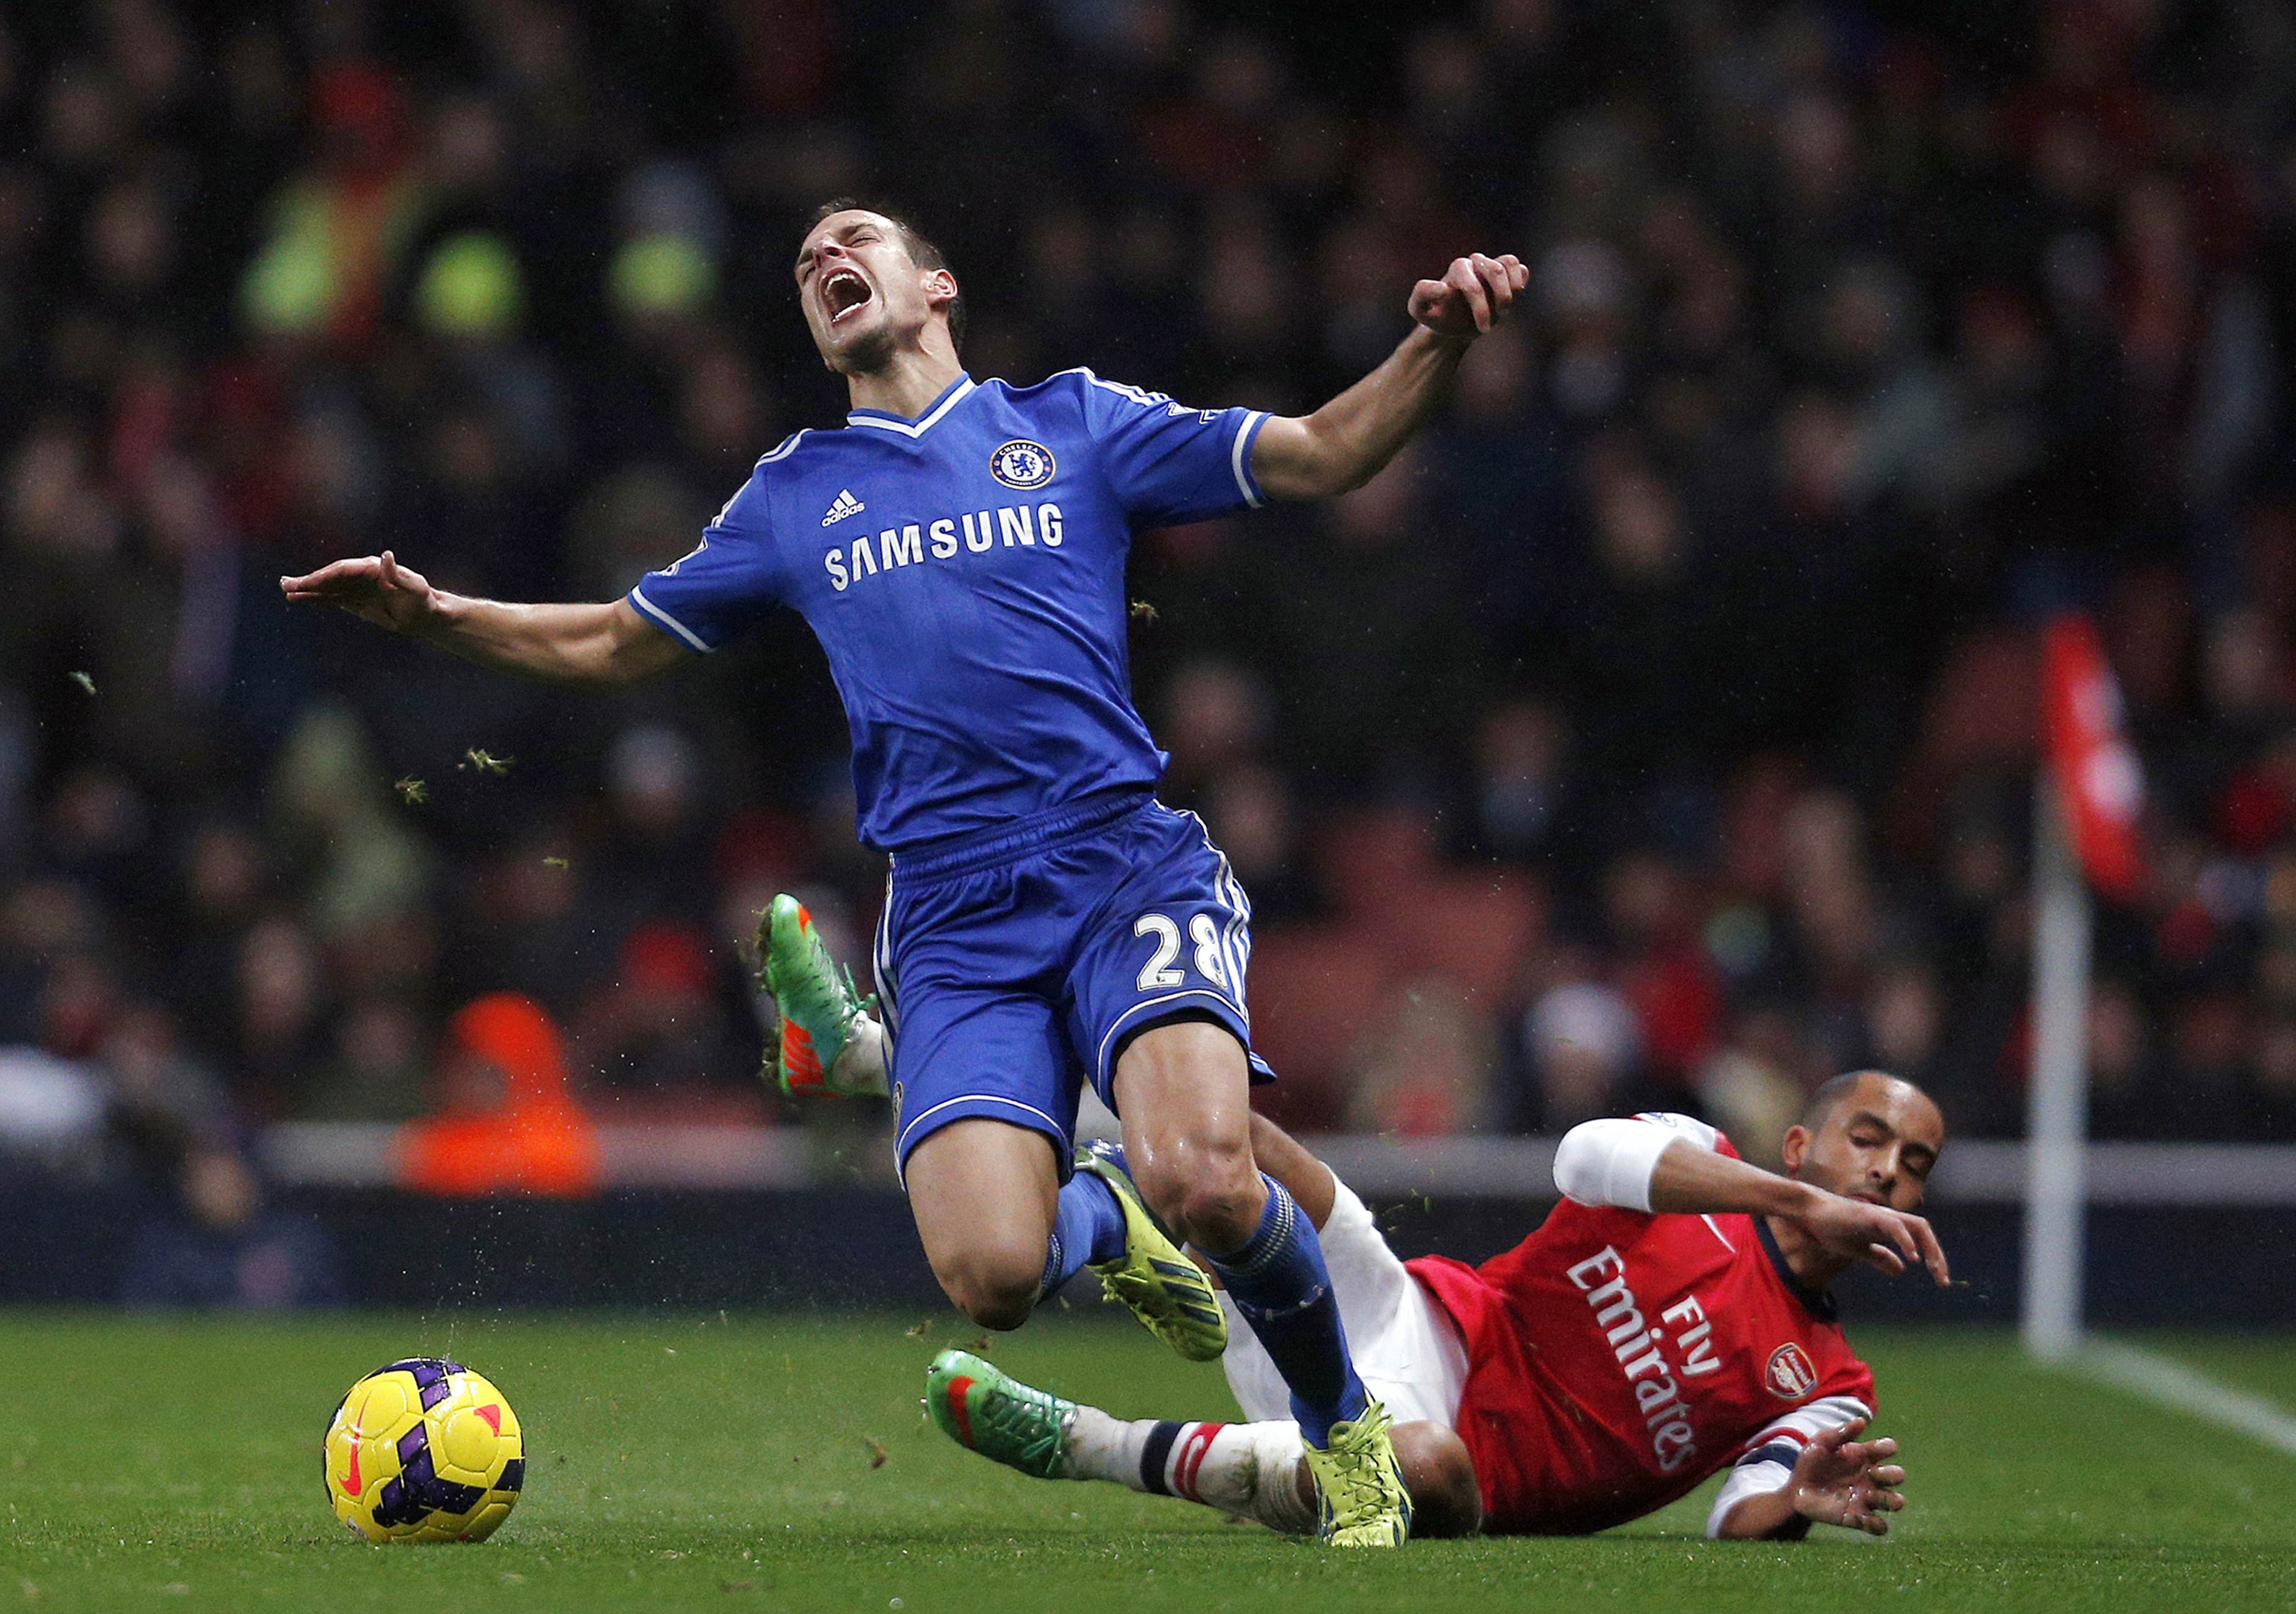 Chelsea defender Cesar Azpilicueta is tackled by Arsenal's striker Theo Walcott at the Emirates Stadium in London on Monday. Photo: AFP